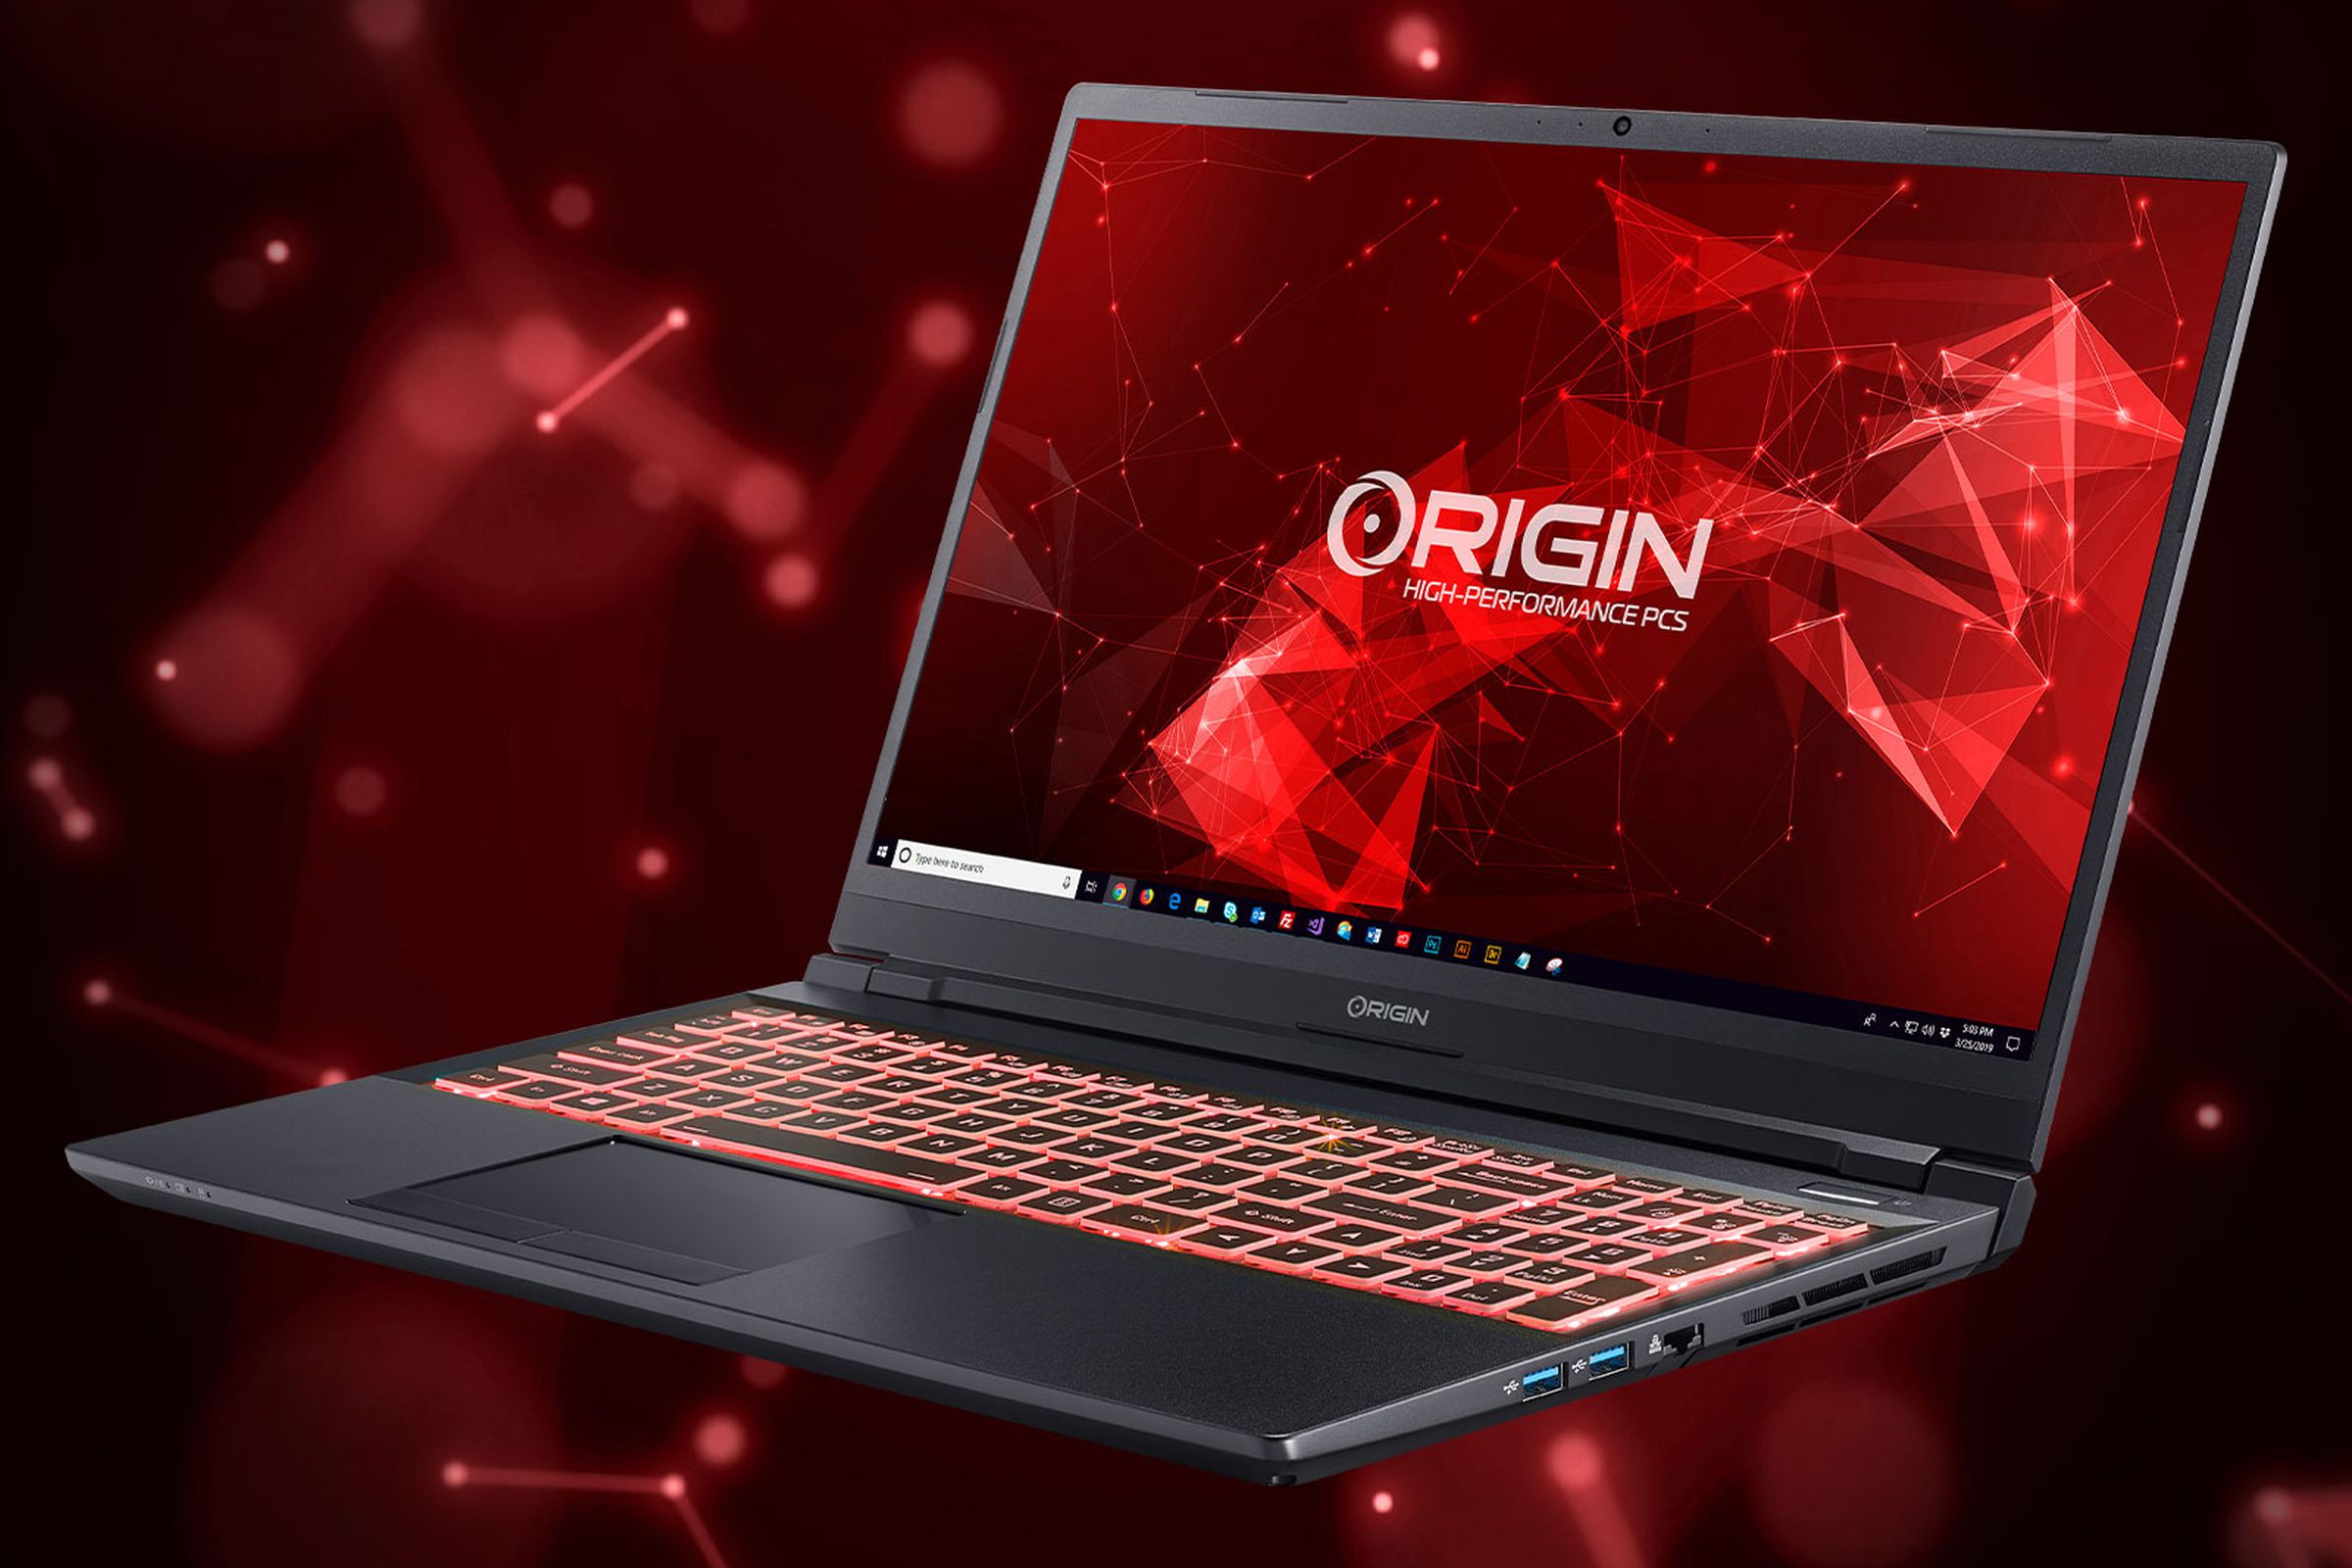 The Origin EVO15-S angled to the left, open, on a red and black background. The screen displays the Origin logo.